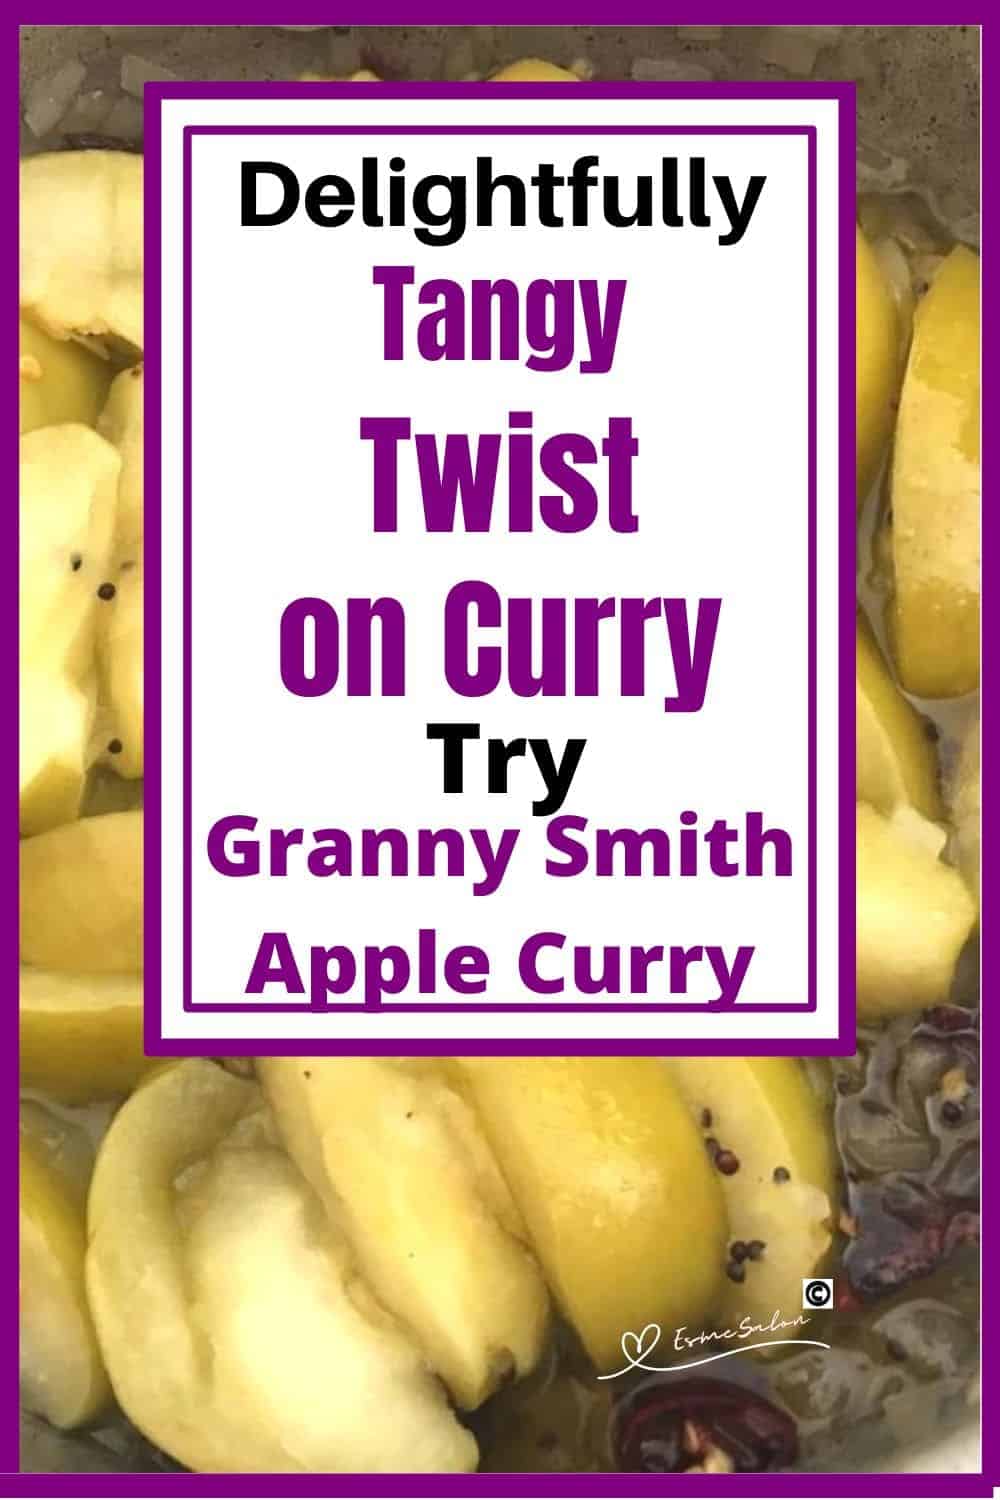 an image of a enamel dish filled with Granny Smith Apple Curry